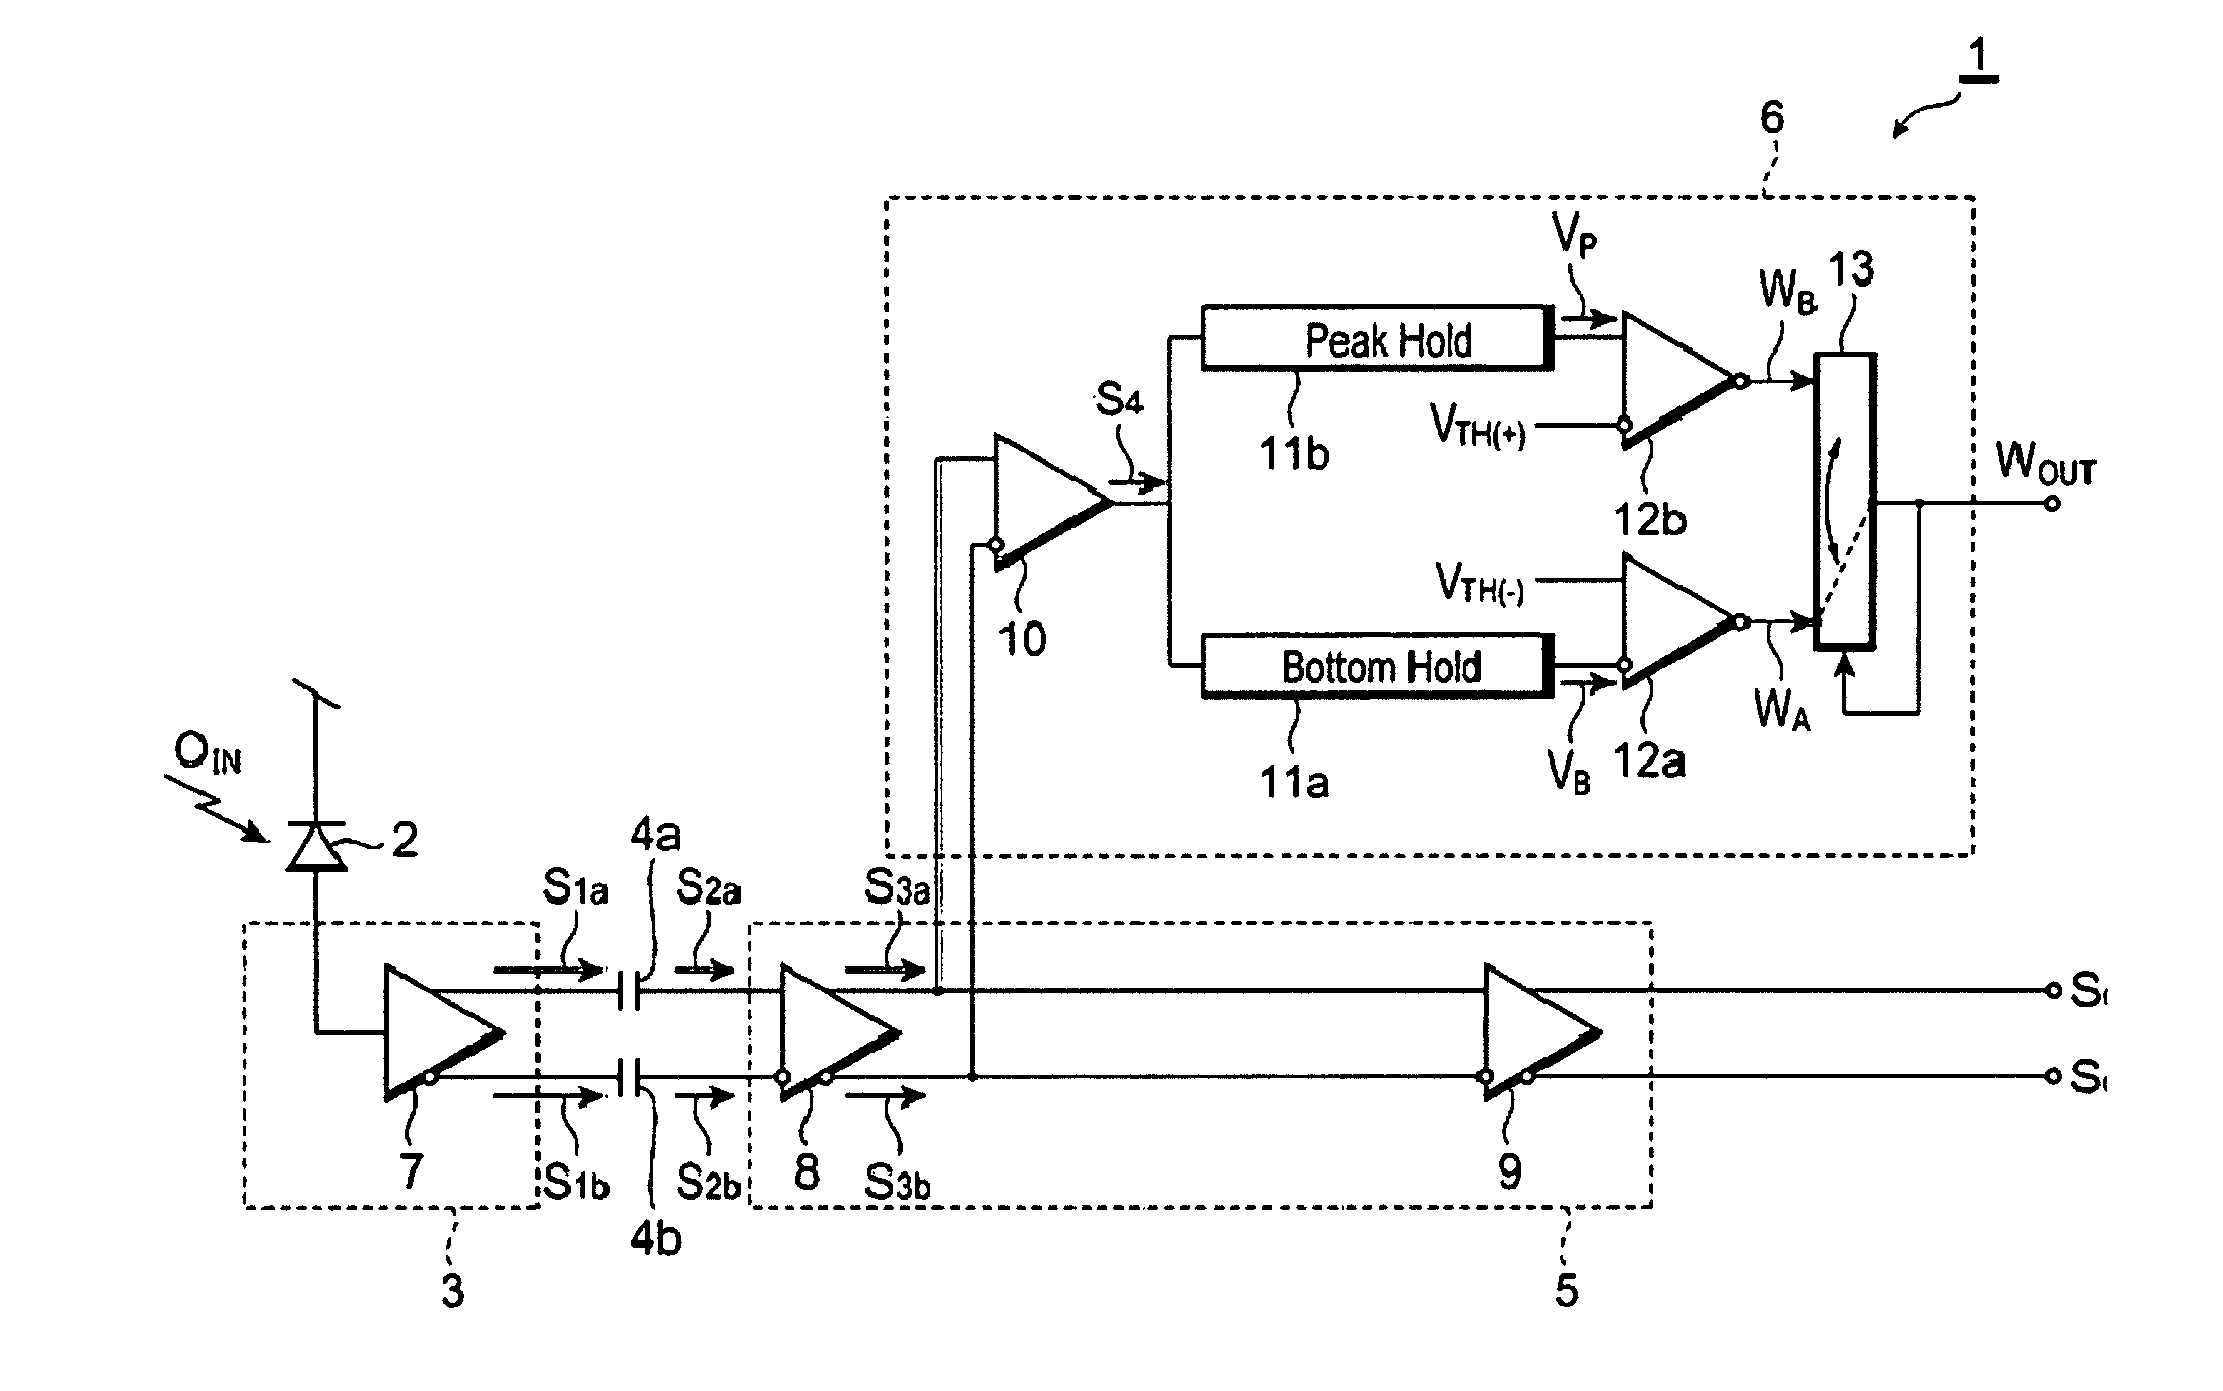 Optical receiver reliably detectable loss-of-signal state